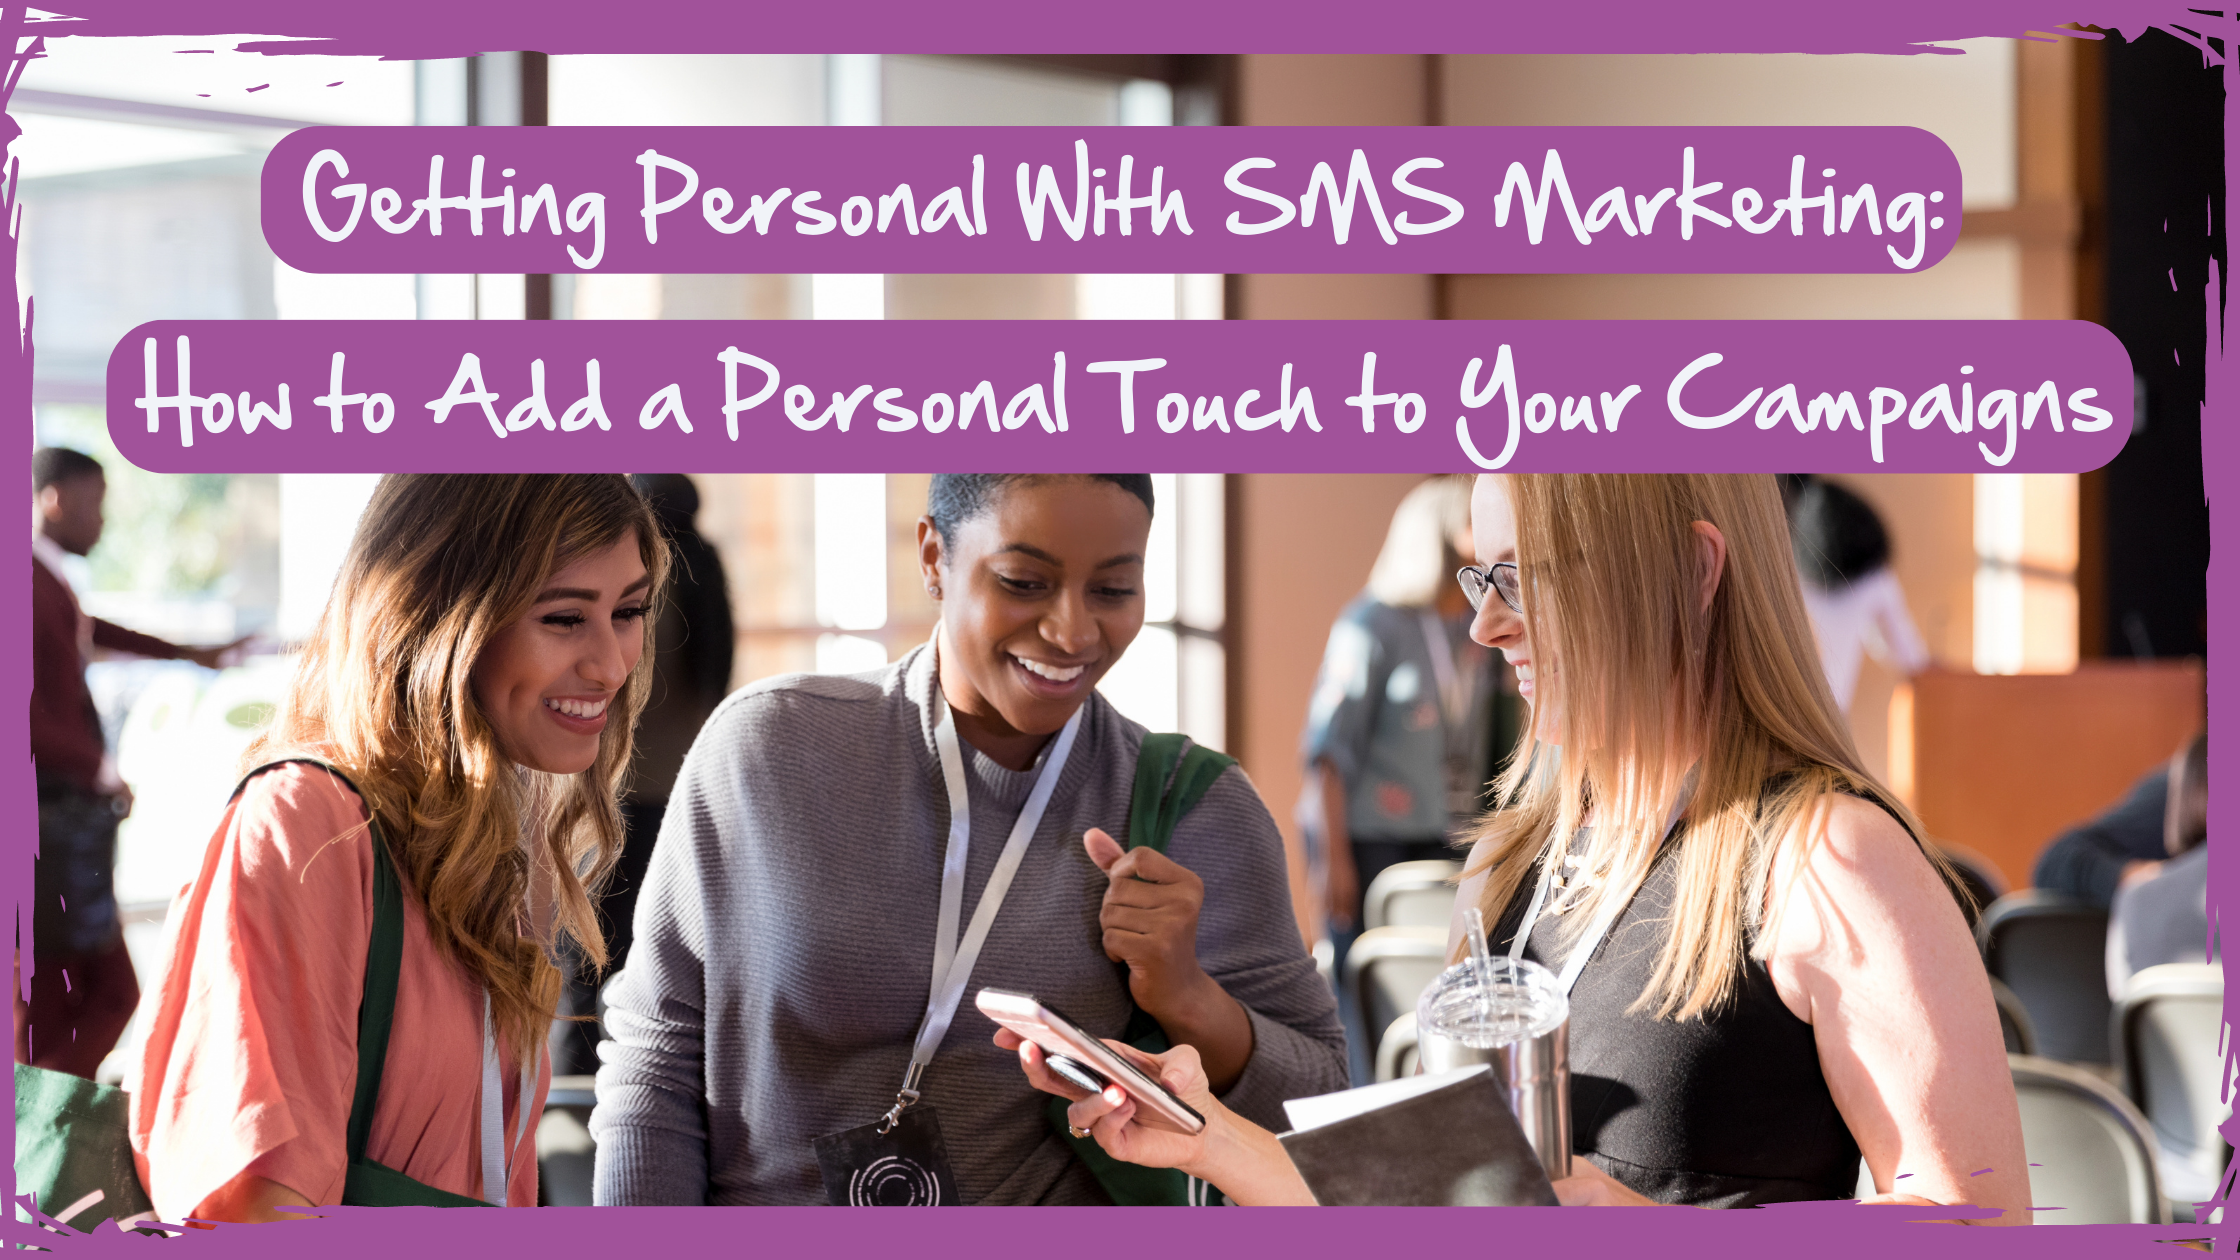 Getting Personal With SMS Marketing